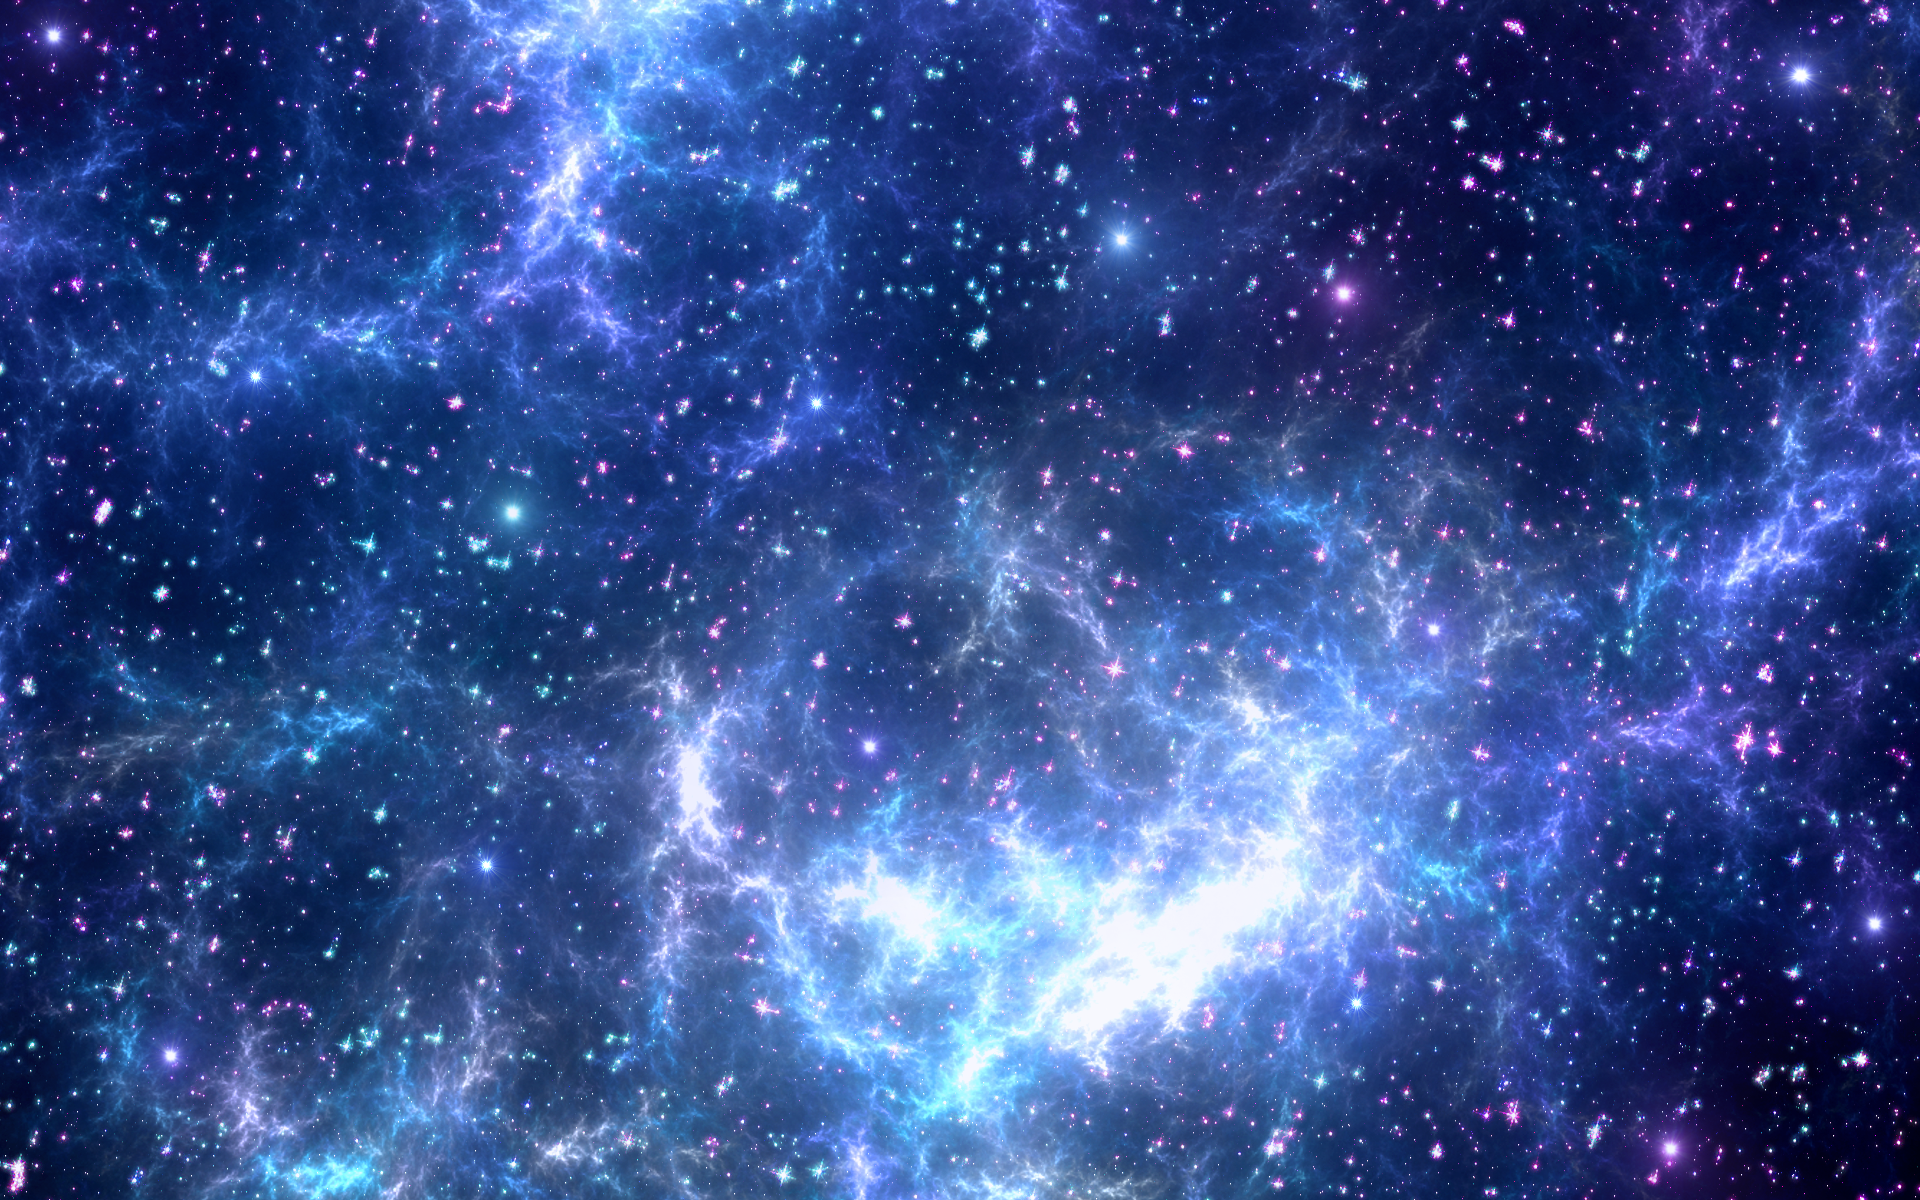 Blue Space Background [Looks the same as the rest] by darkdissolution